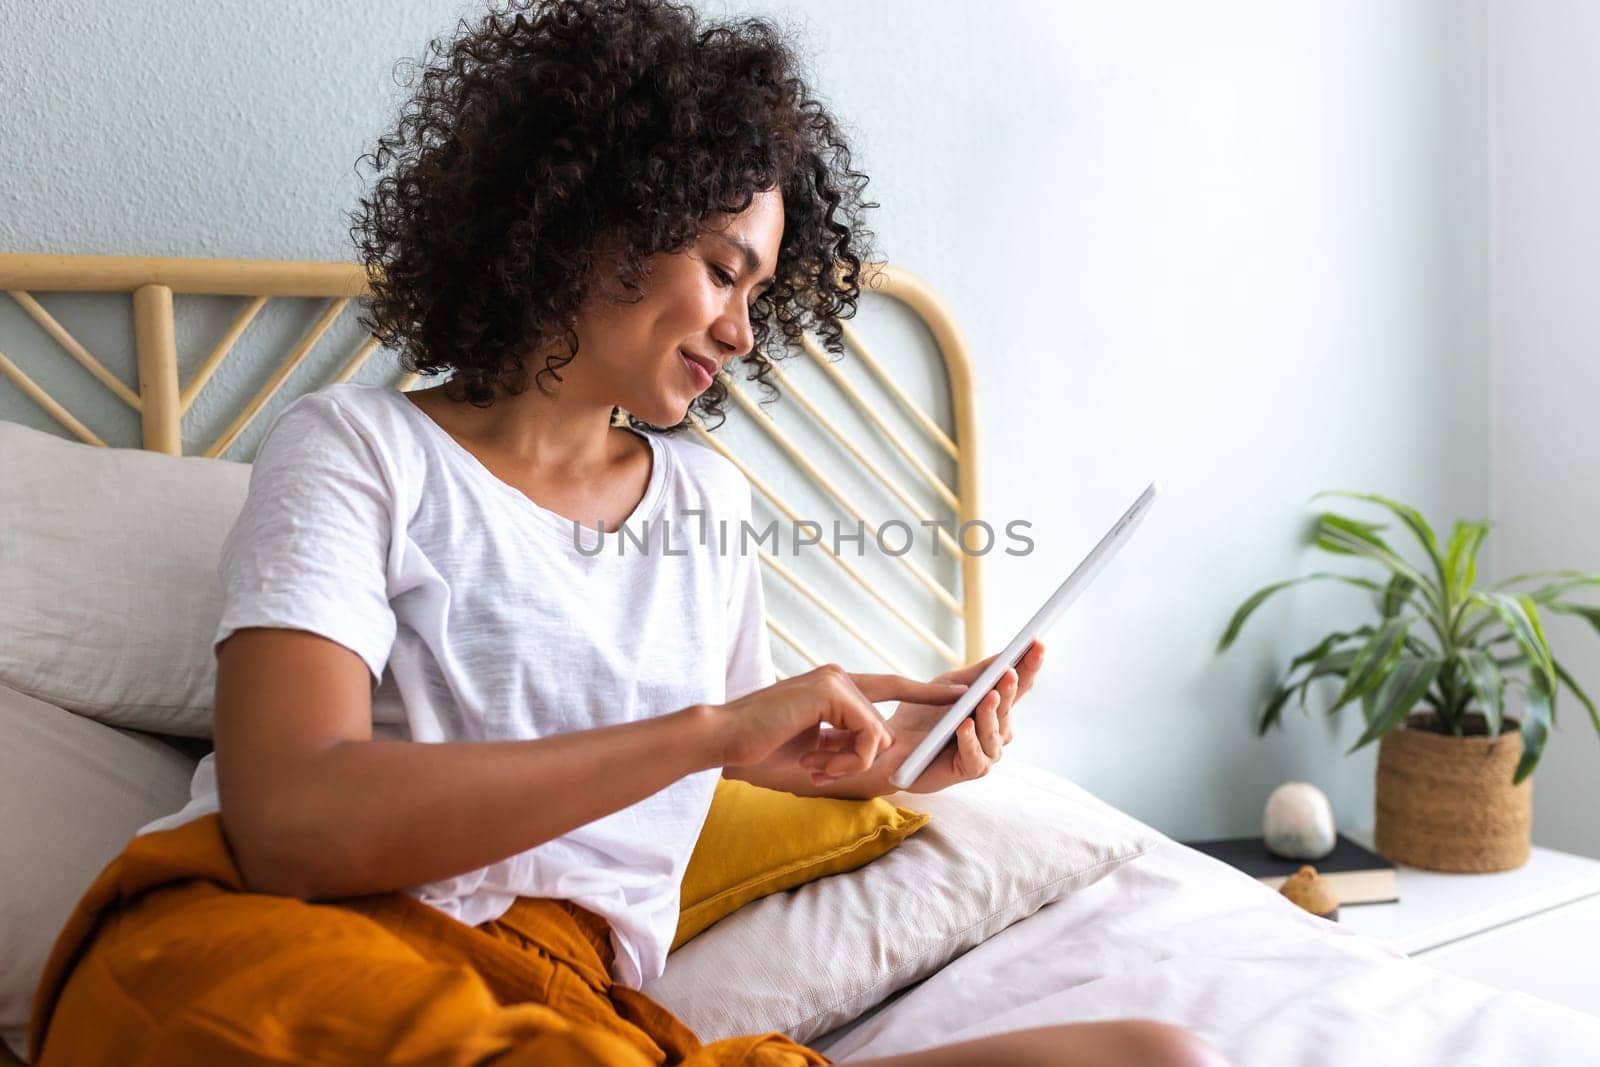 Young African American woman using tablet lying down relaxing on bed at home cozy bedroom. Technology concept.